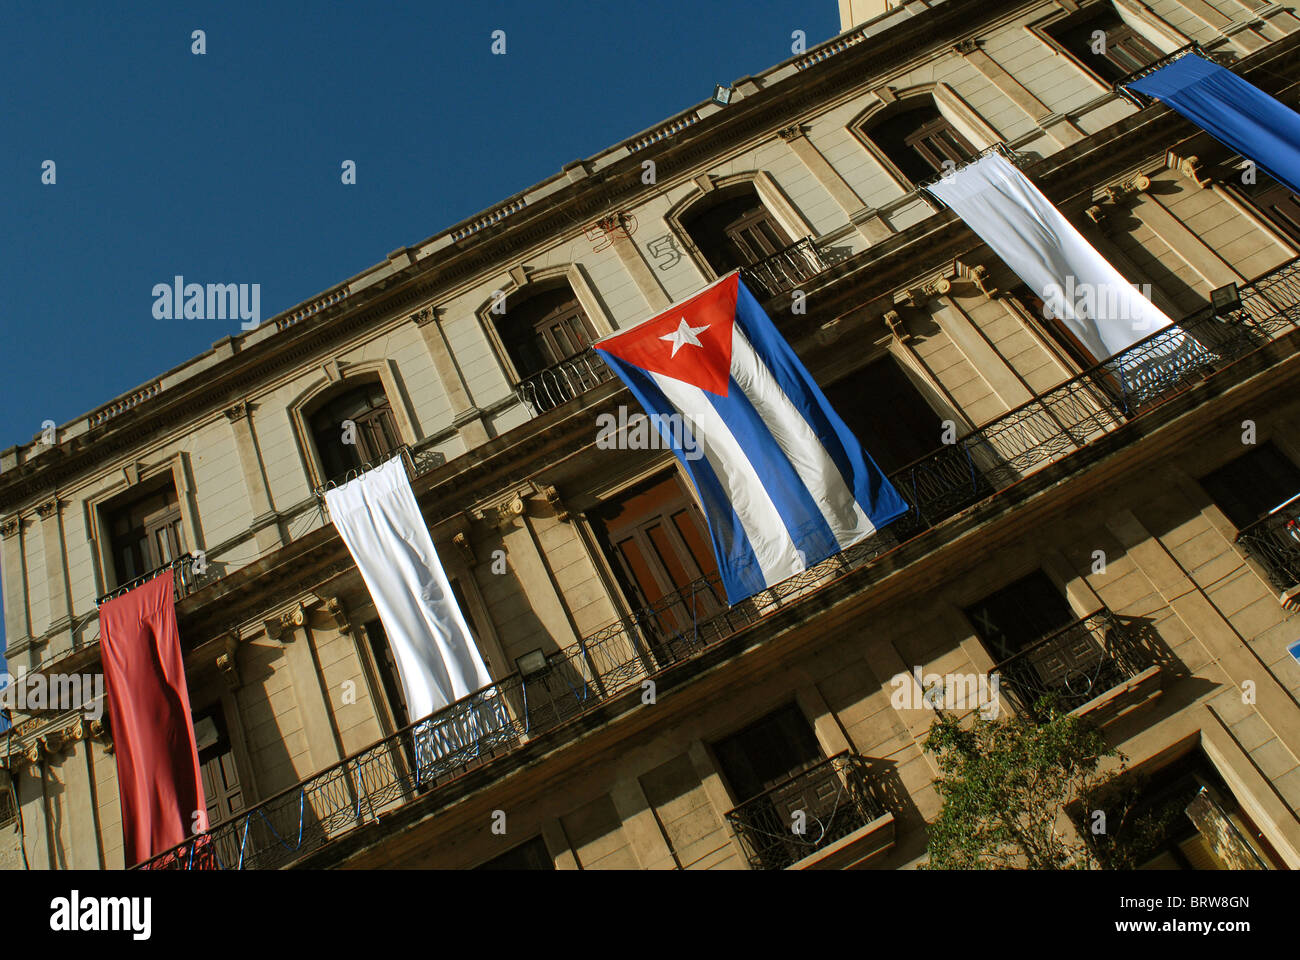 A street in Havana with flag and banners during celebrations to mark the 50th anniversary of the Cuban revolution Stock Photo